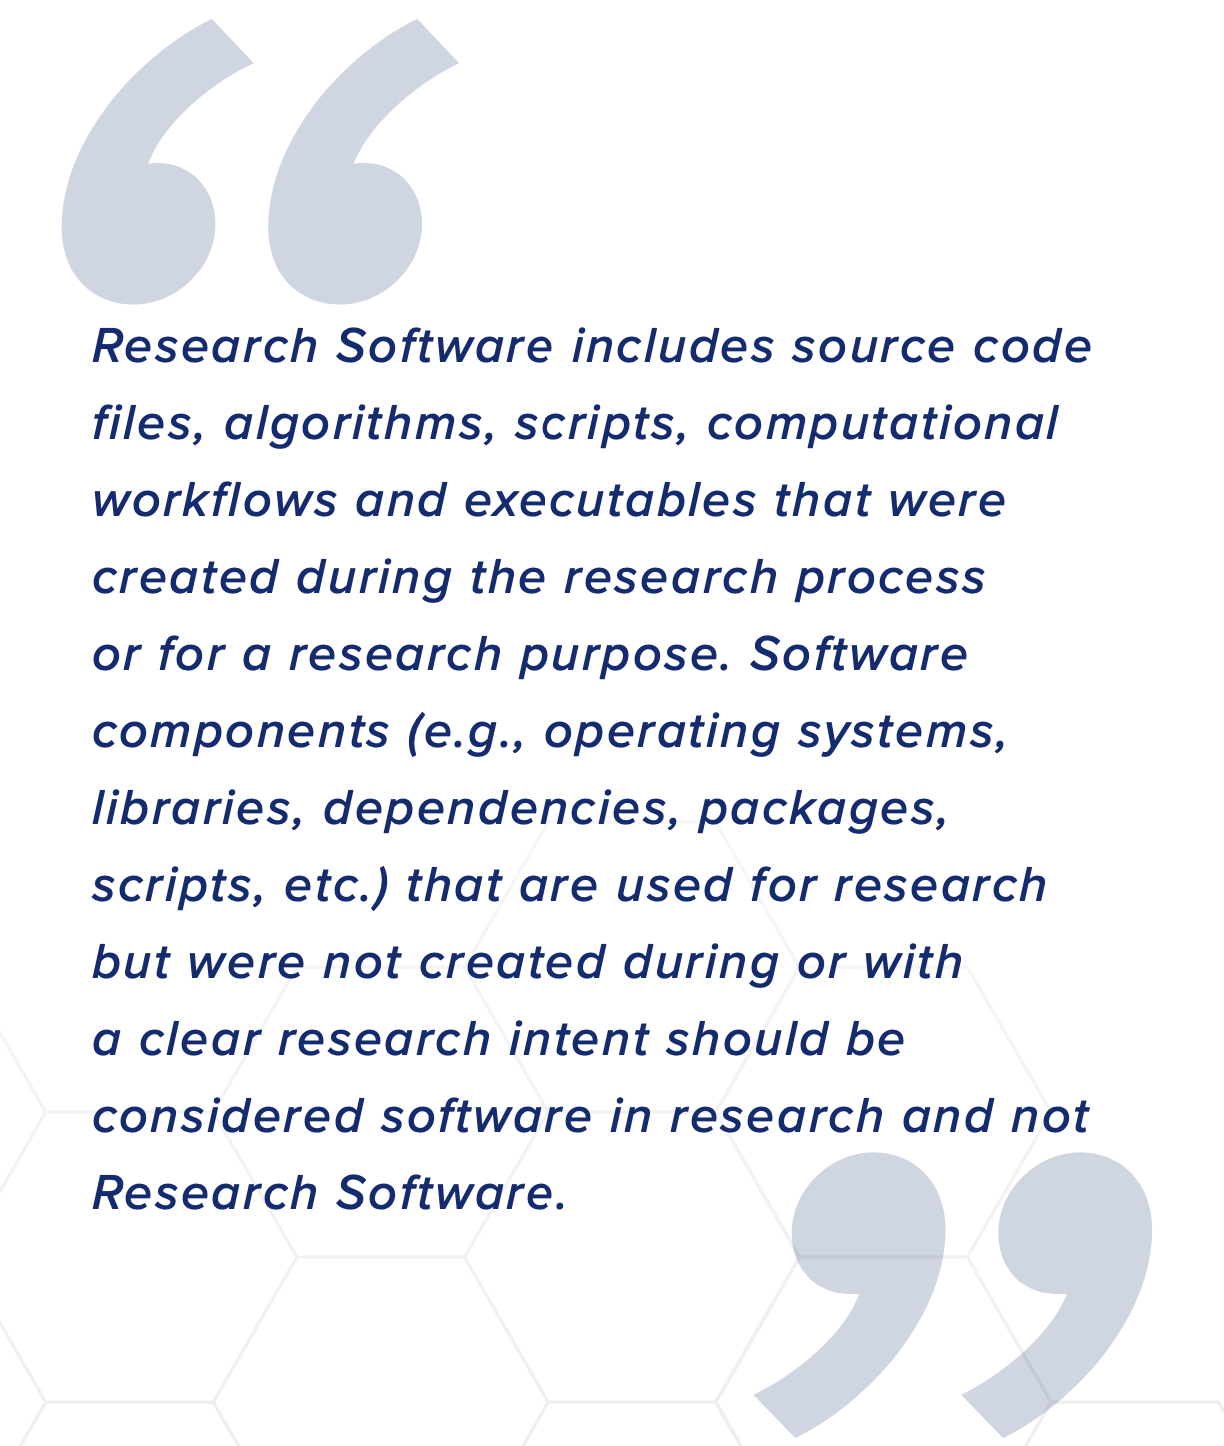 Quote: Research Software includes source code files, algorithms, scripts, computational workflows and executables that were created during the research process or for a research purpose. Software components (e.g., operating systems, libraries, dependencies, packages, scripts, etc.) that are used for research but were not created during or with a clear research intent should be considered software in research and not Research Software.